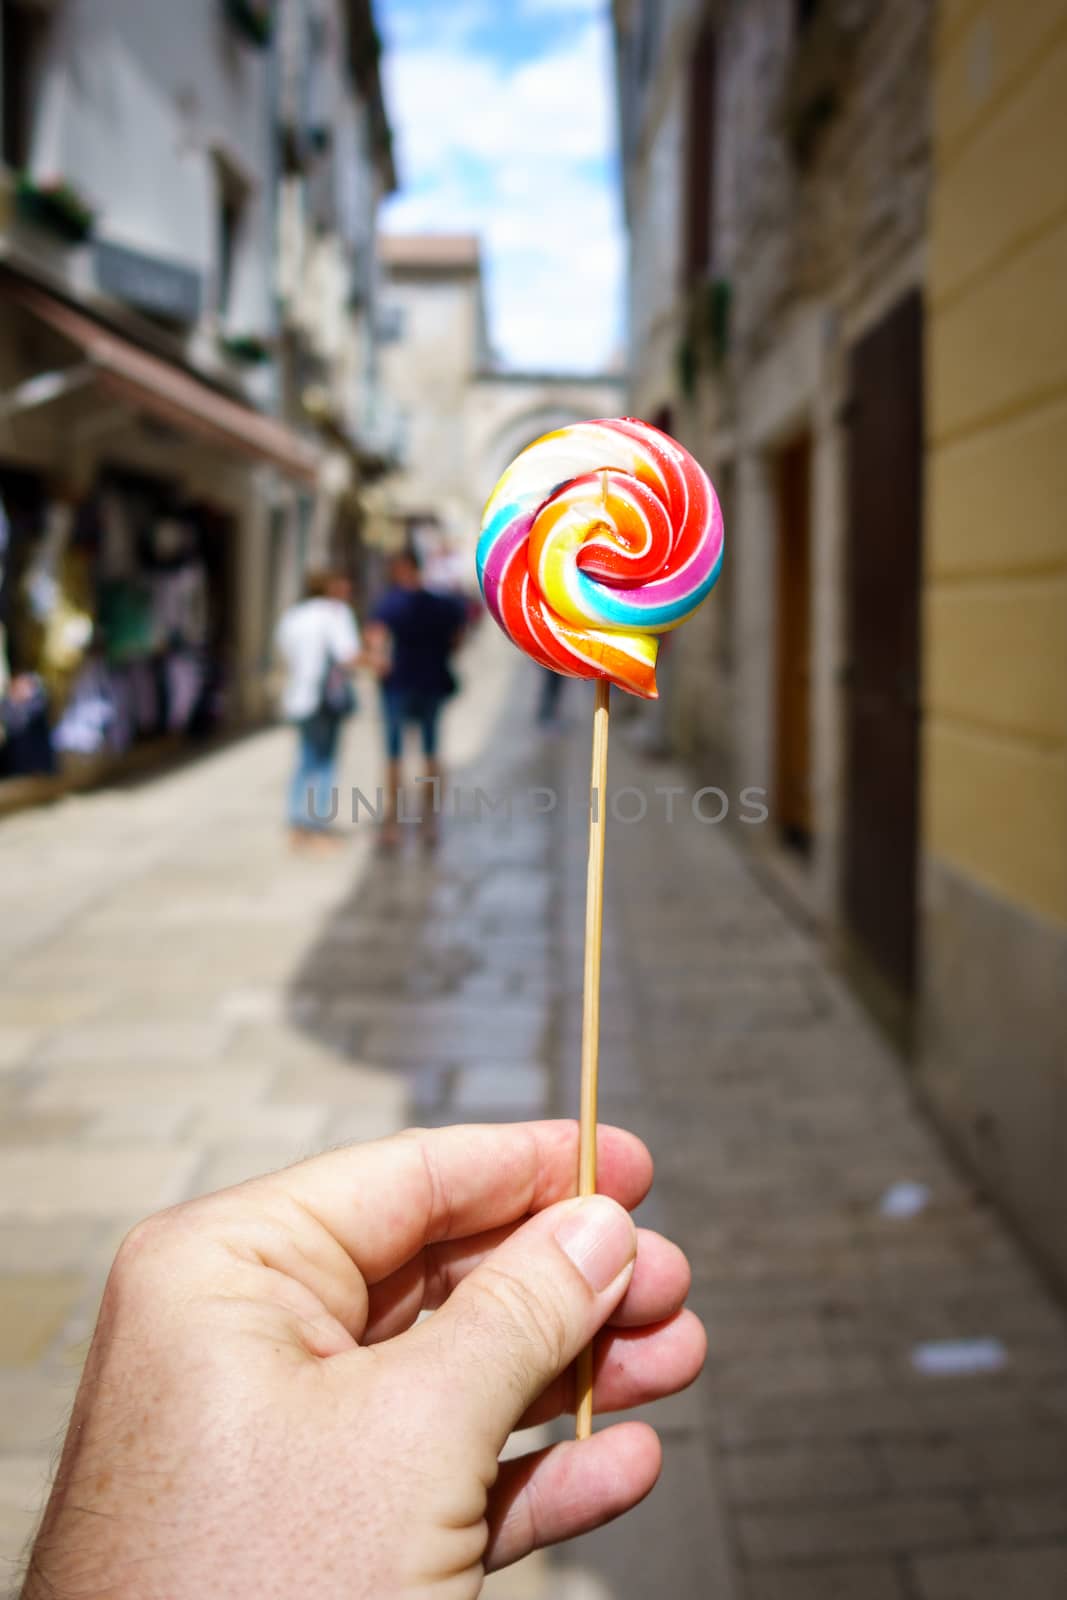 Hand holding colorful lolipop, old city street blurred as background